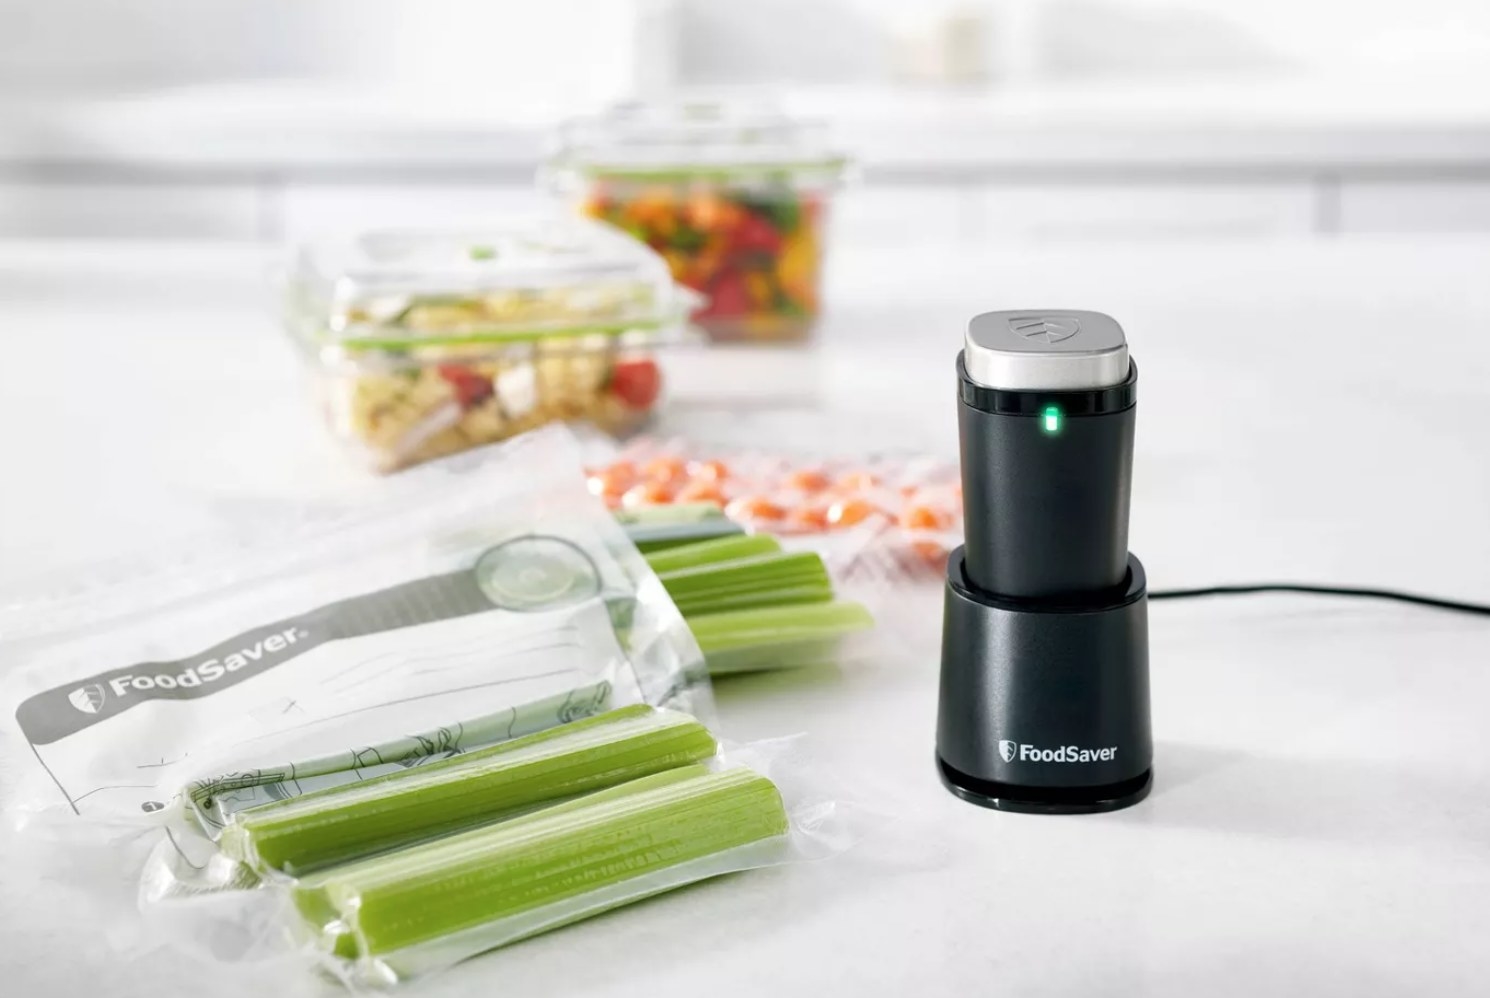 the vacuum sealer with celery in a sealed bag